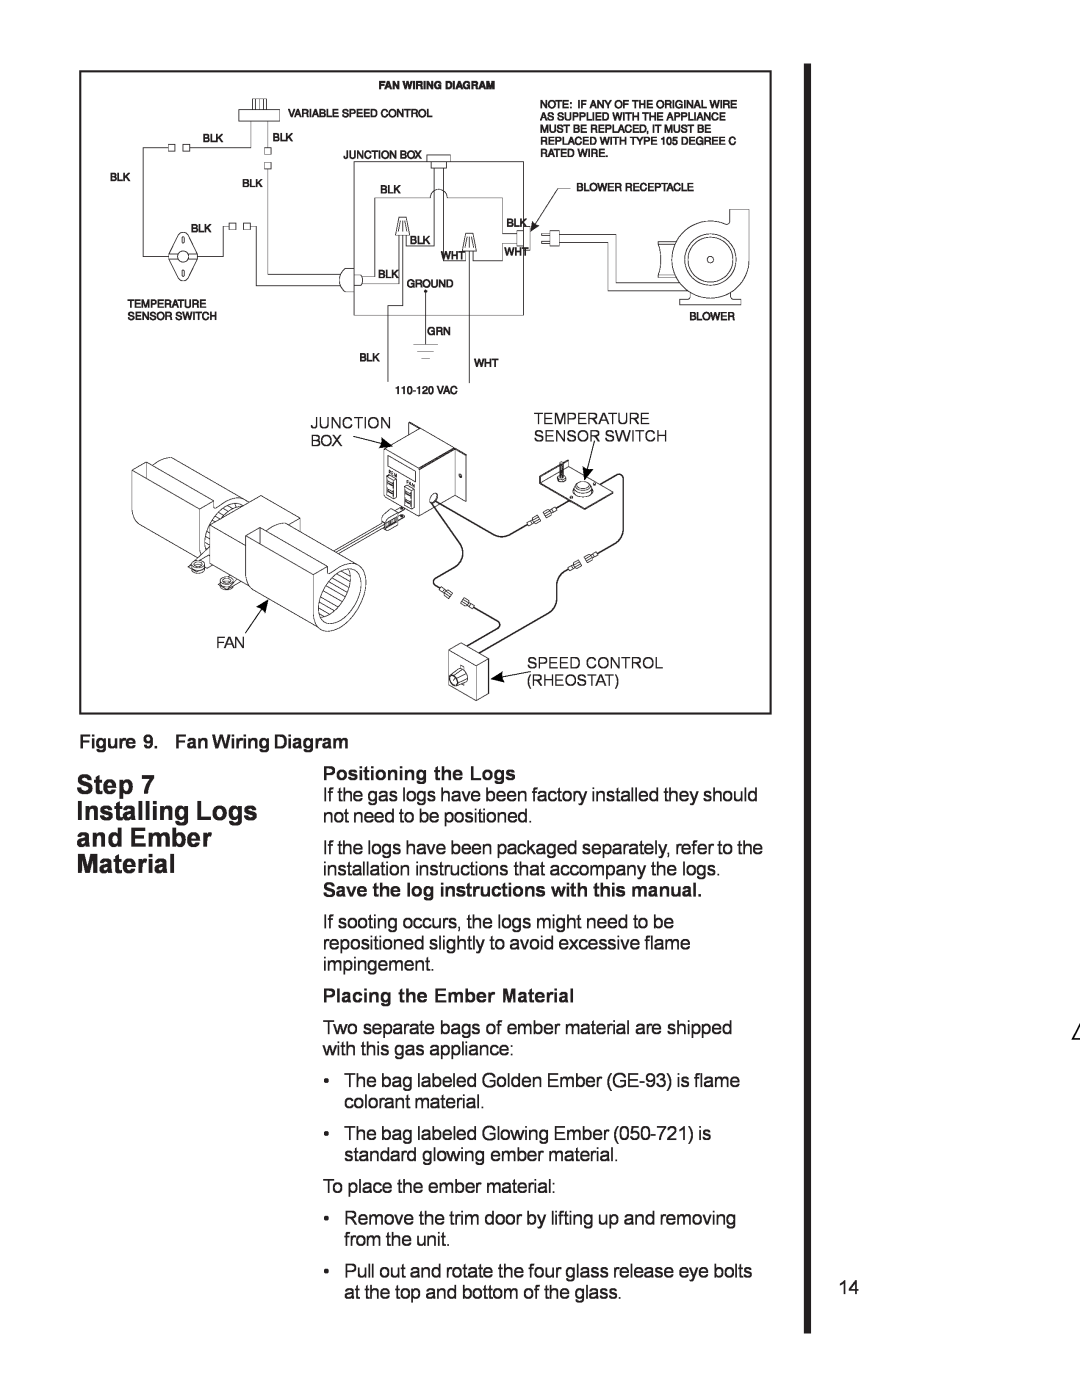 Heat & Glo LifeStyle AT-GRAND manual Step Installing Logs and Ember Material, Fan Wiring Diagram, Positioning the Logs 